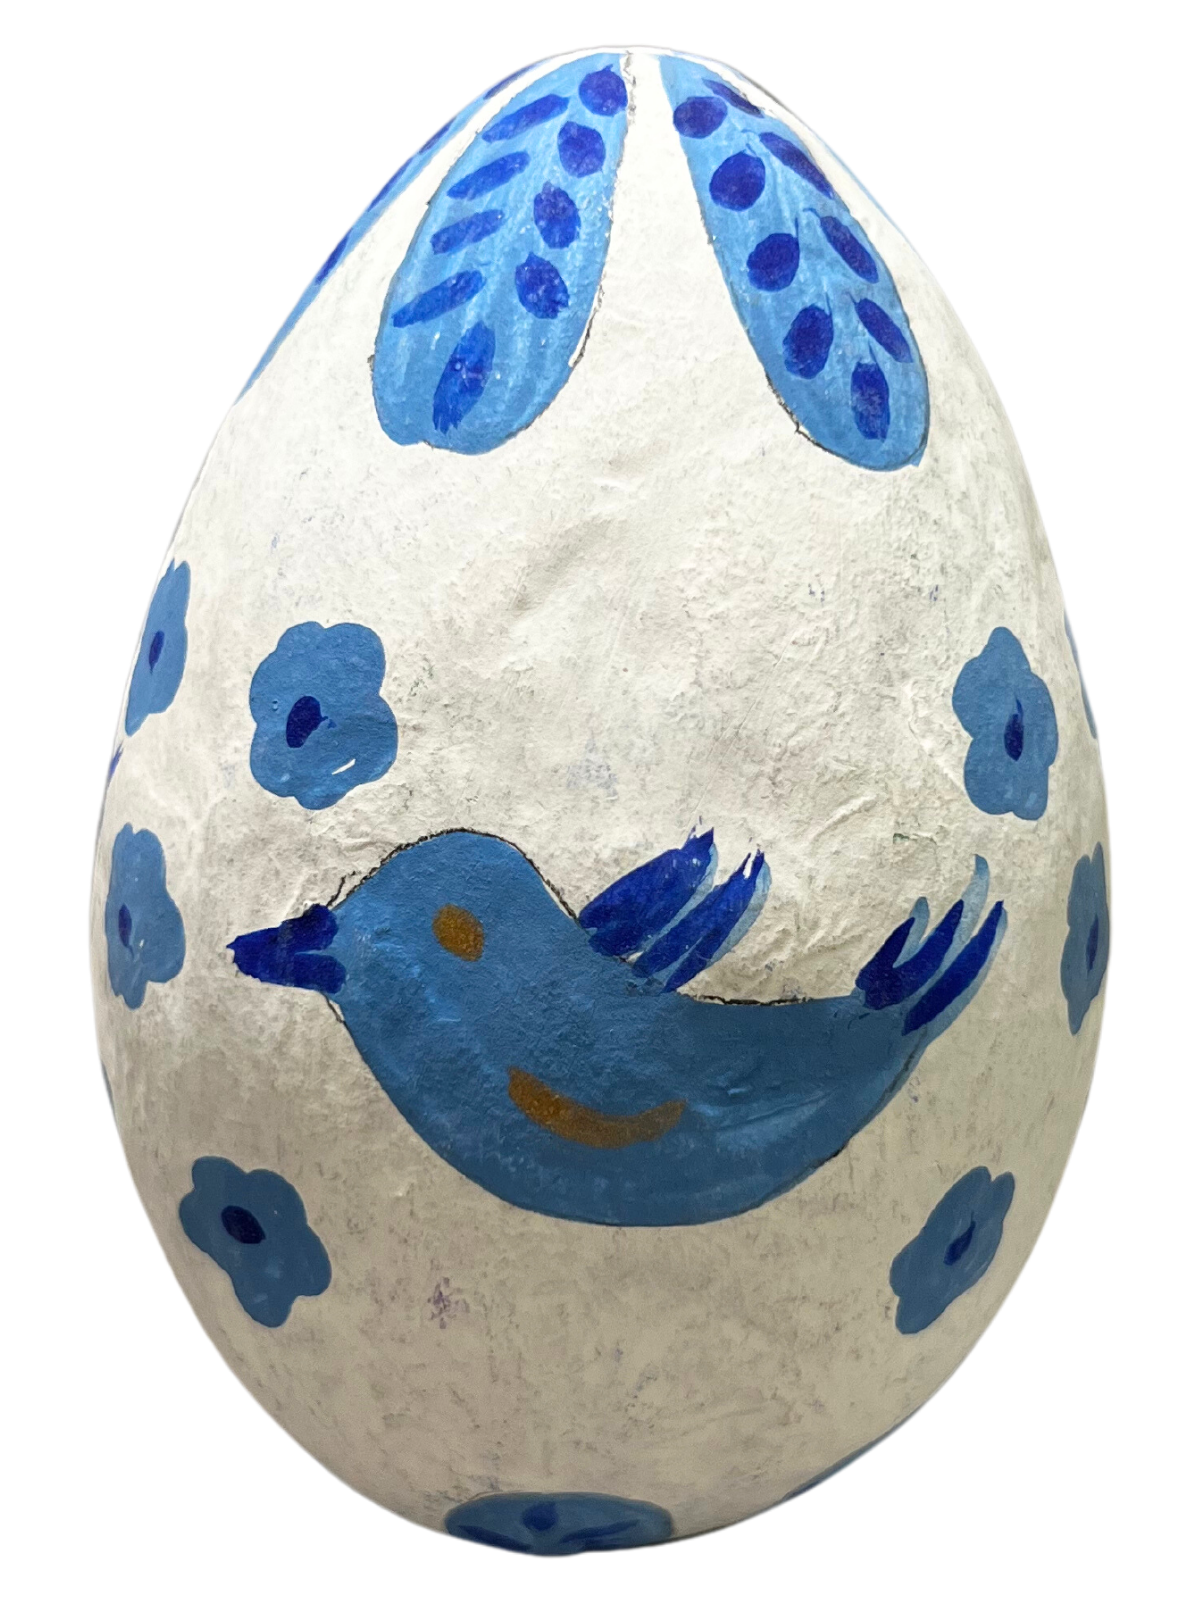 Paper Mache Hand Painted Easter egg